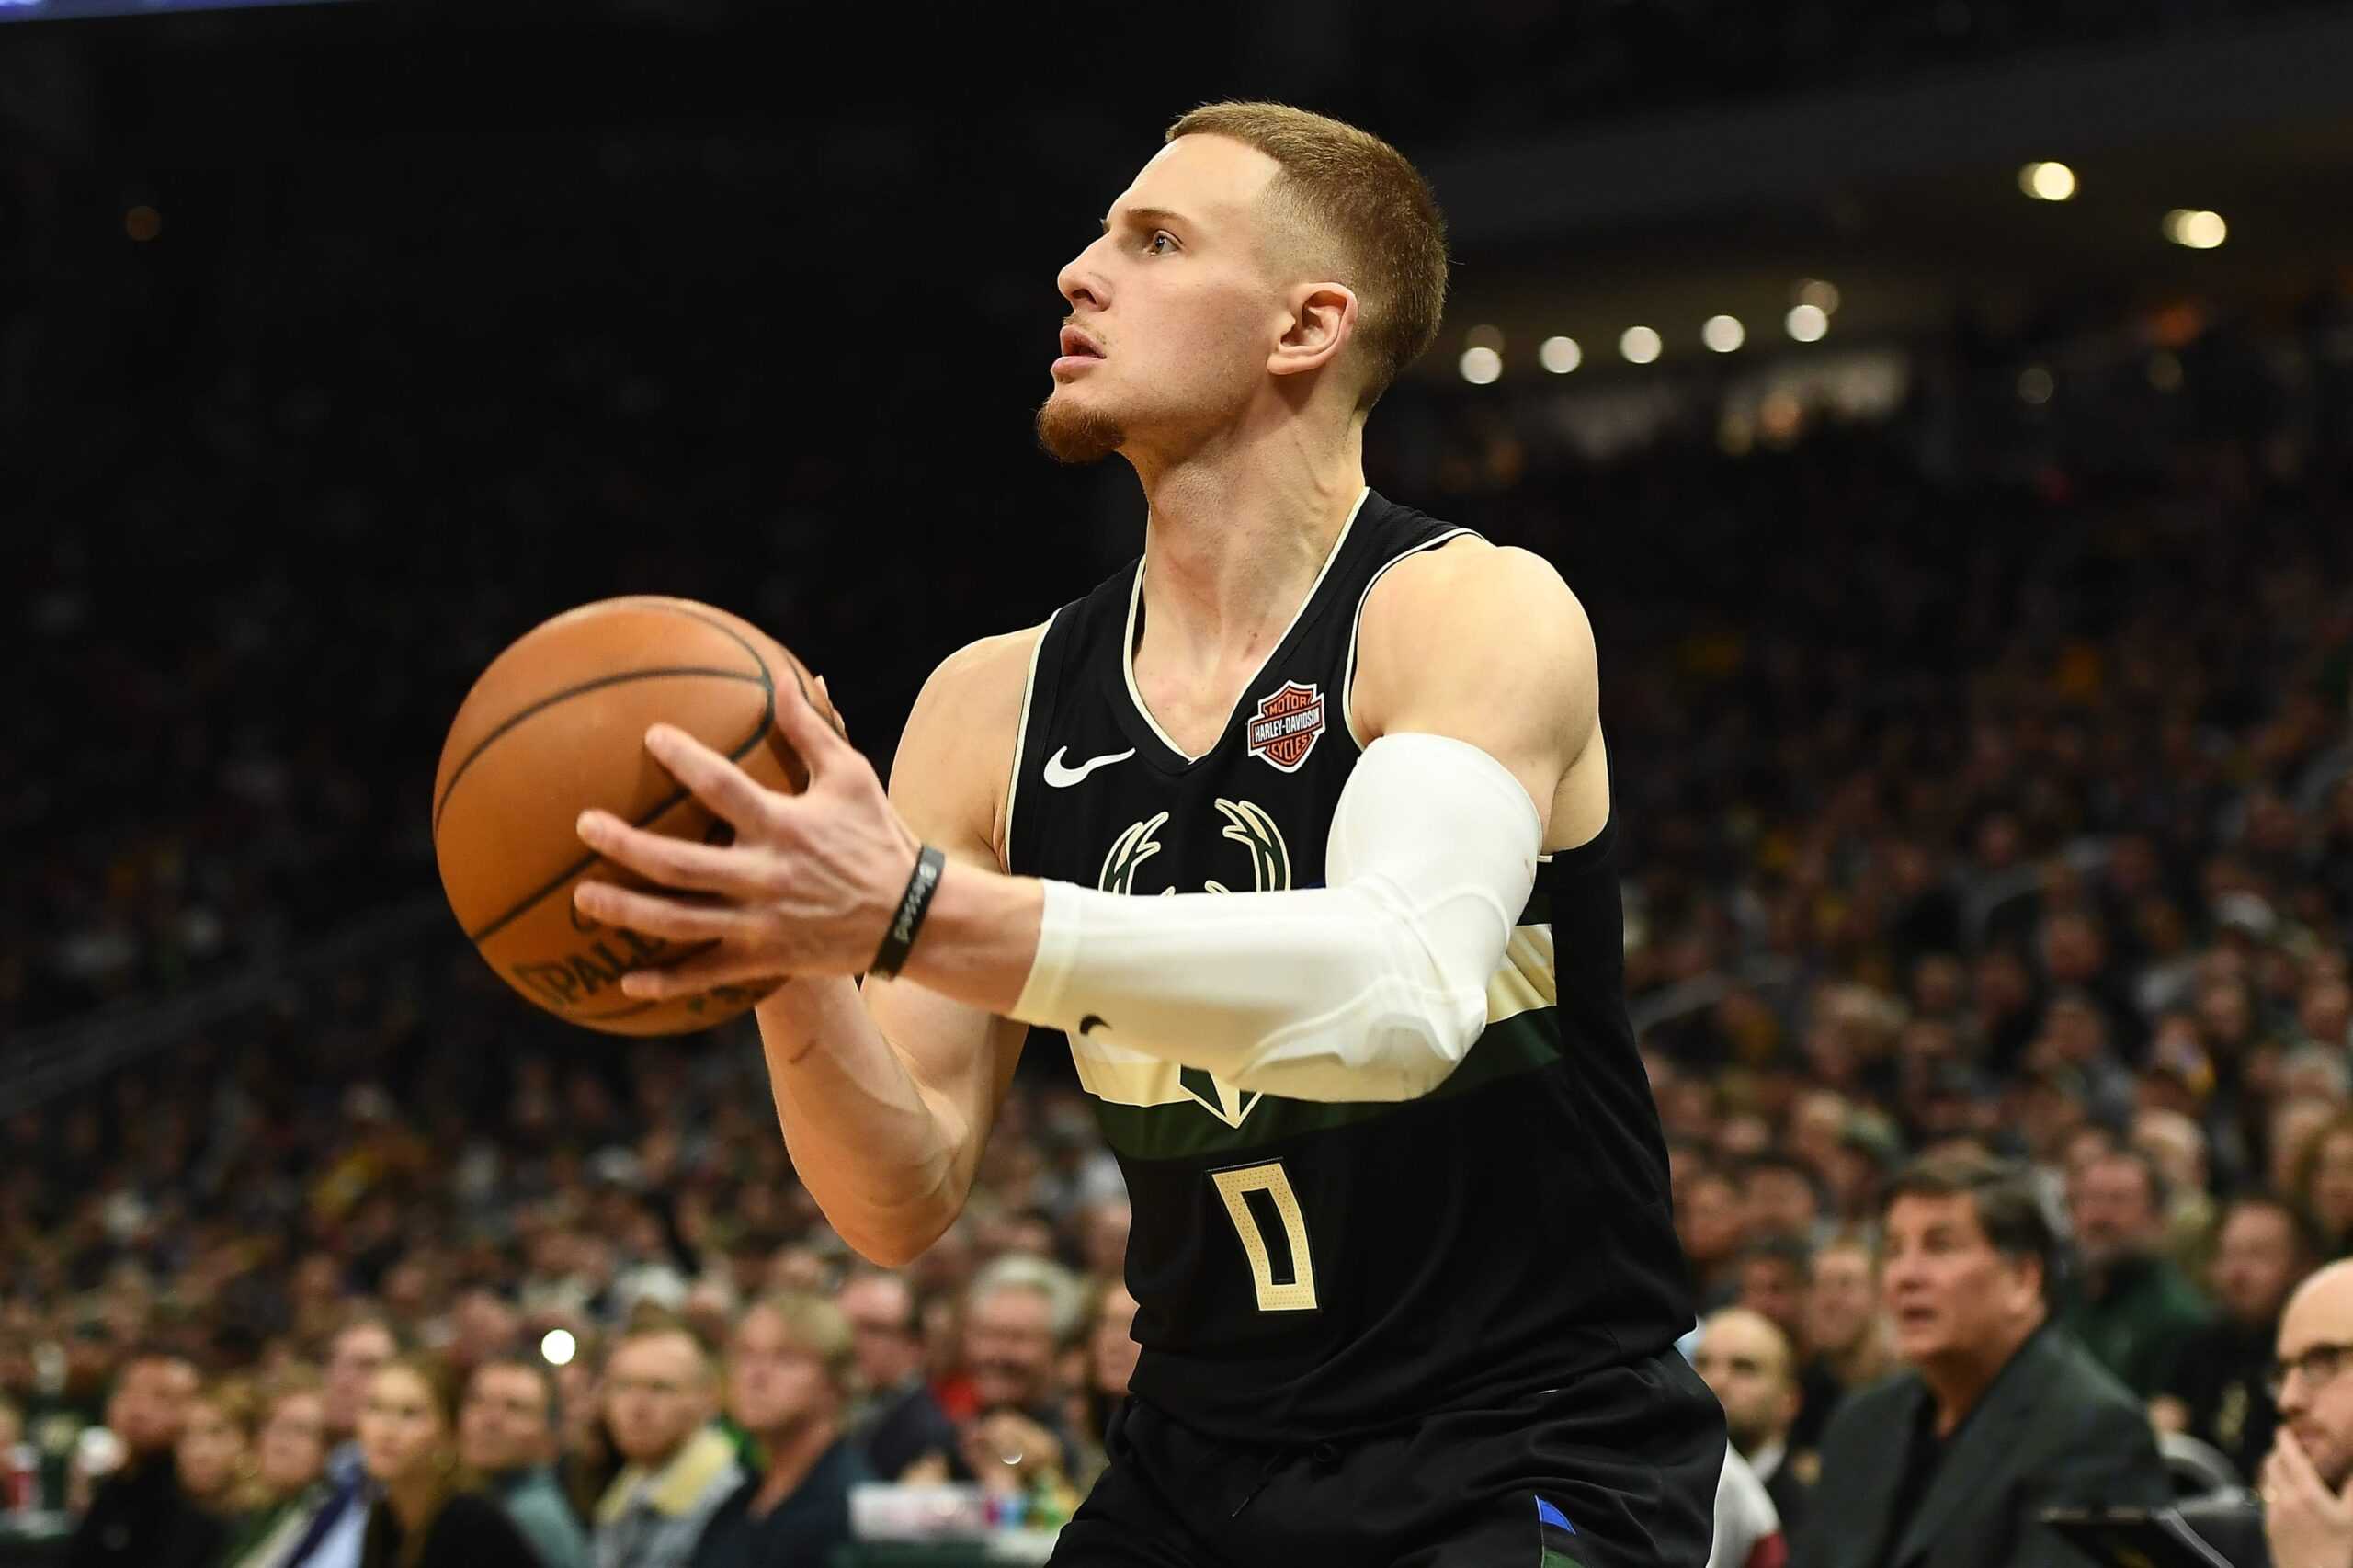 donte divincenzo scaled